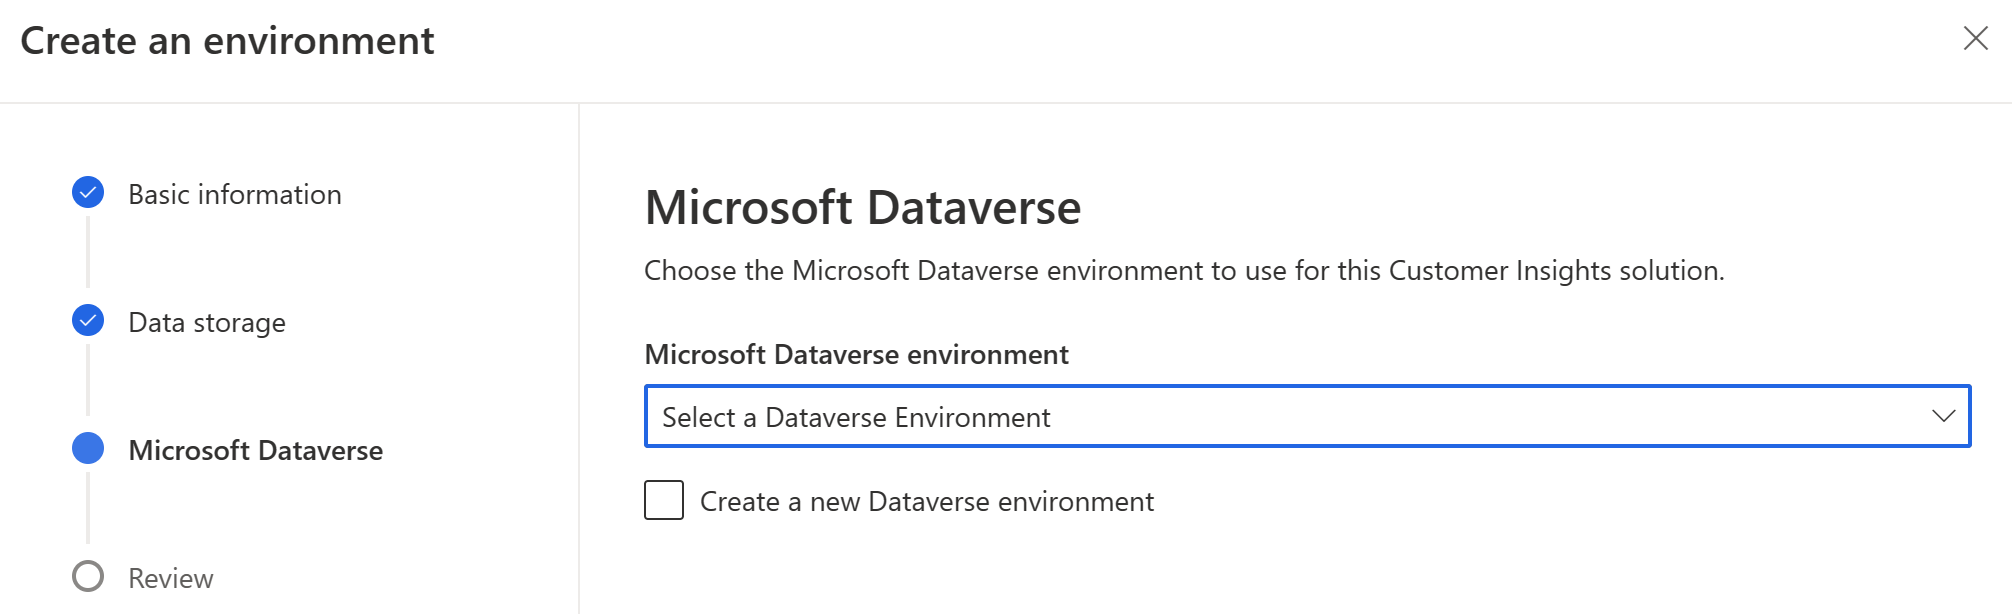 data sharing with Microsoft Dataverse auto-enabled for net new environments.